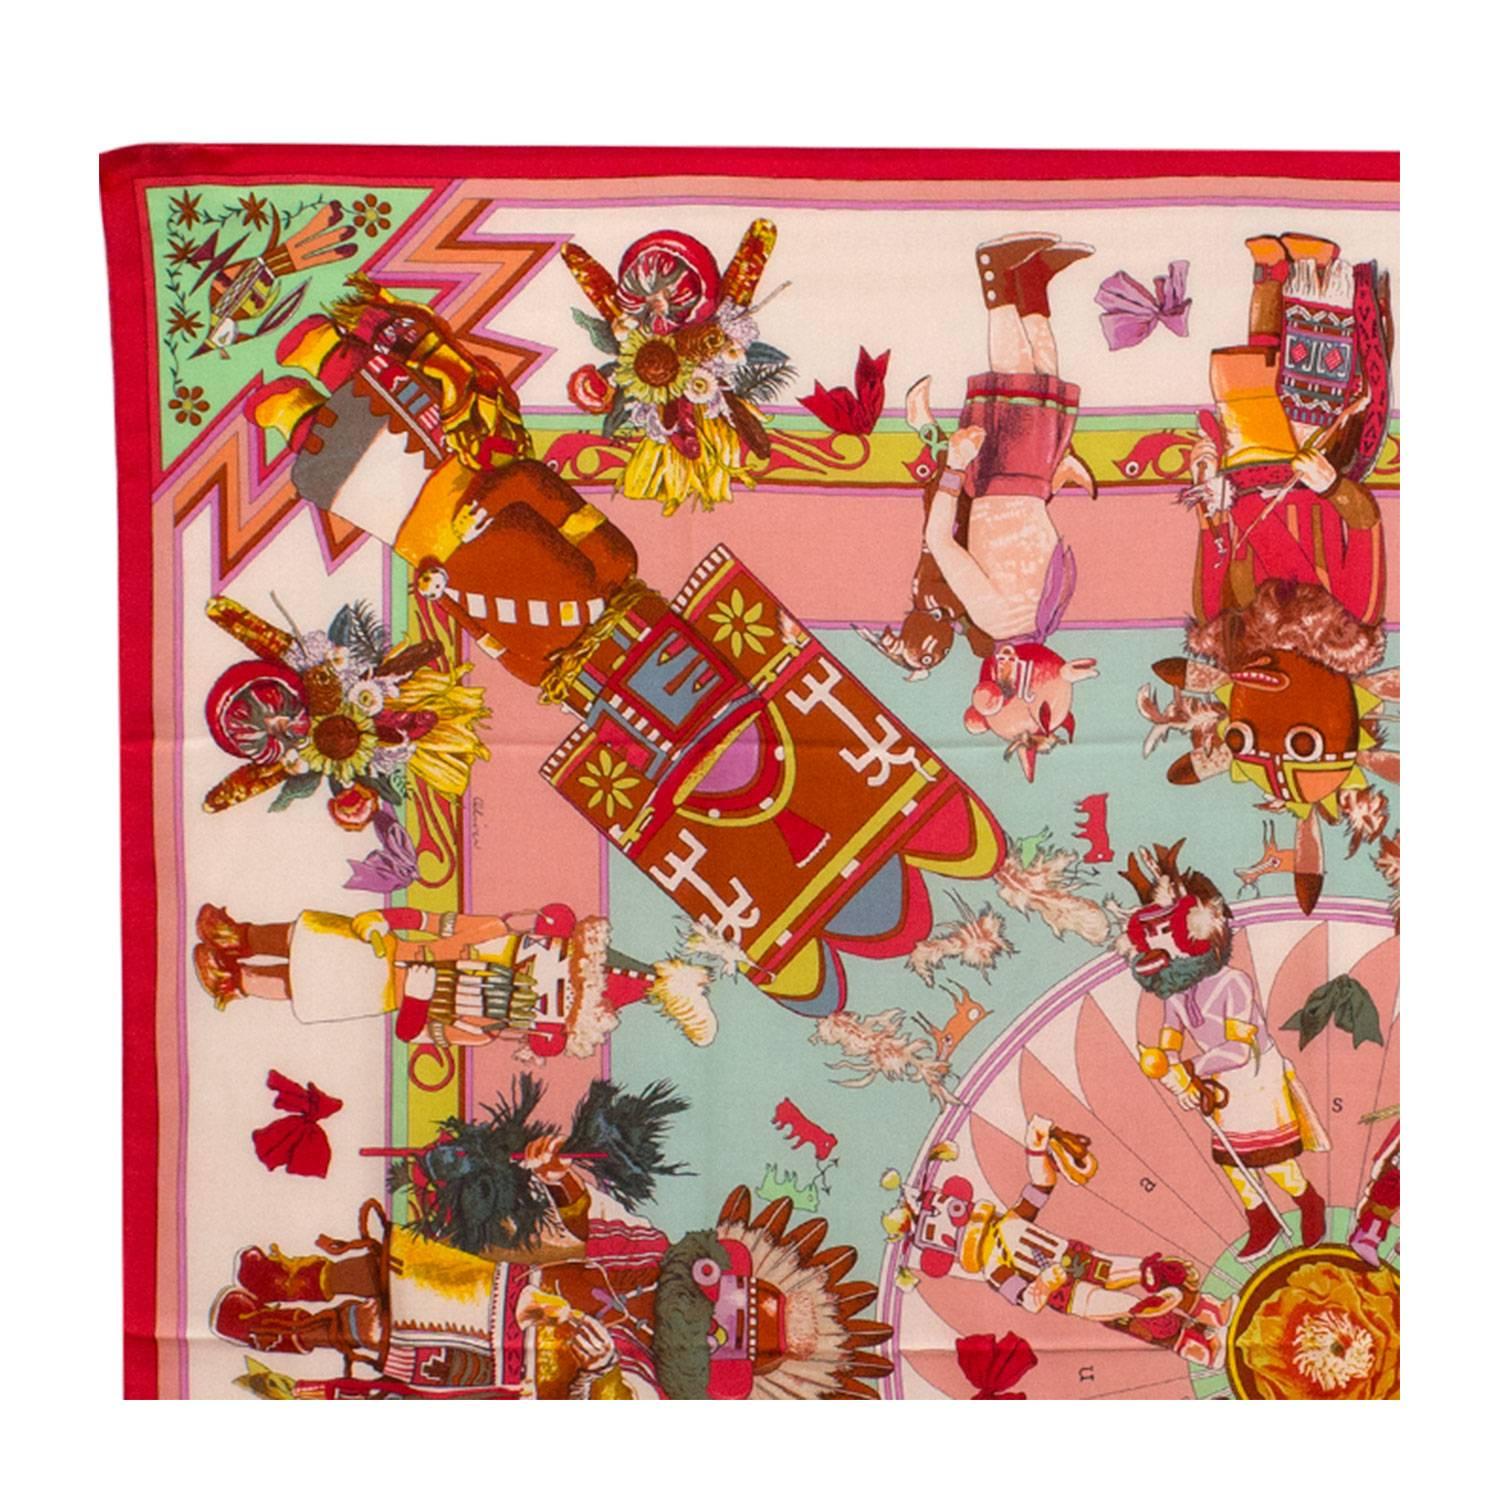 Hermes Shawl (Chale) 140cm Kachinas Model 70% cashmere and 30% Silk Raspberry/Aqua/Powdery Pink Color 2016

Pre-owned and never used.

Bought it in Hermes store in 2016.

Model: Kachinas.

Composition: 70% Cachemire/30%Silk.

Size: 140 cm